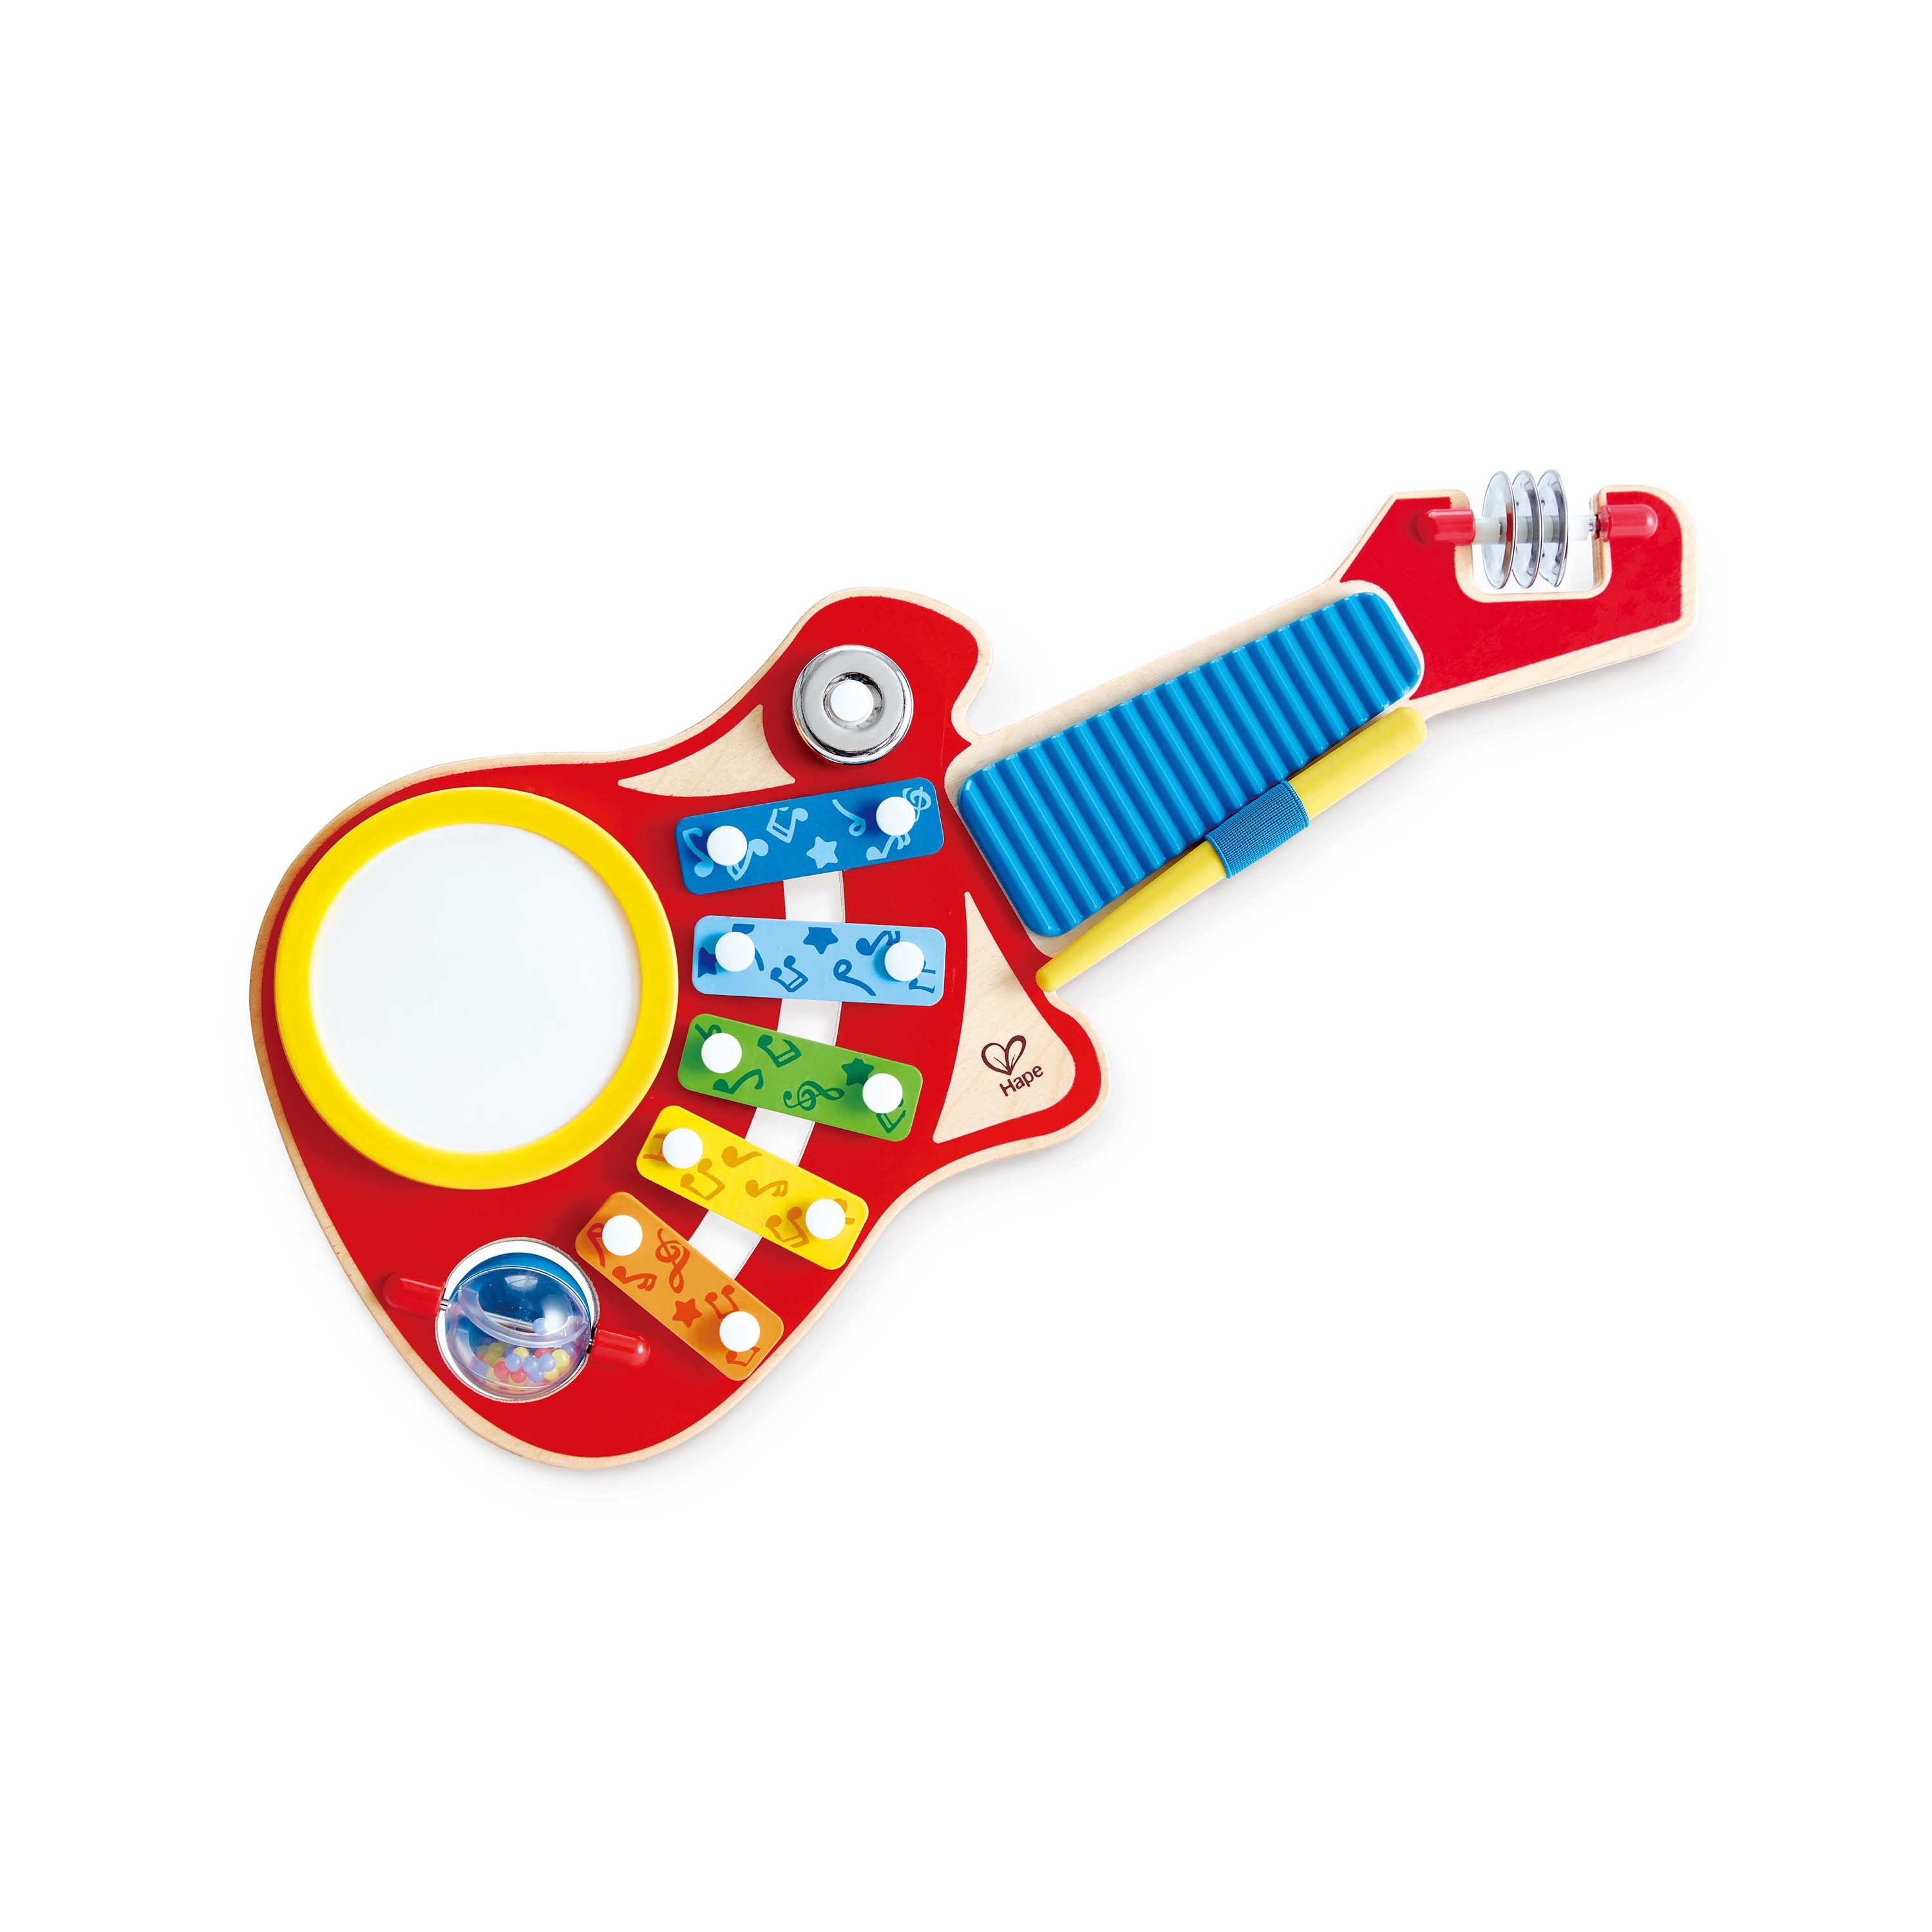 6-in-1 Music Maker Ages 18+ Months